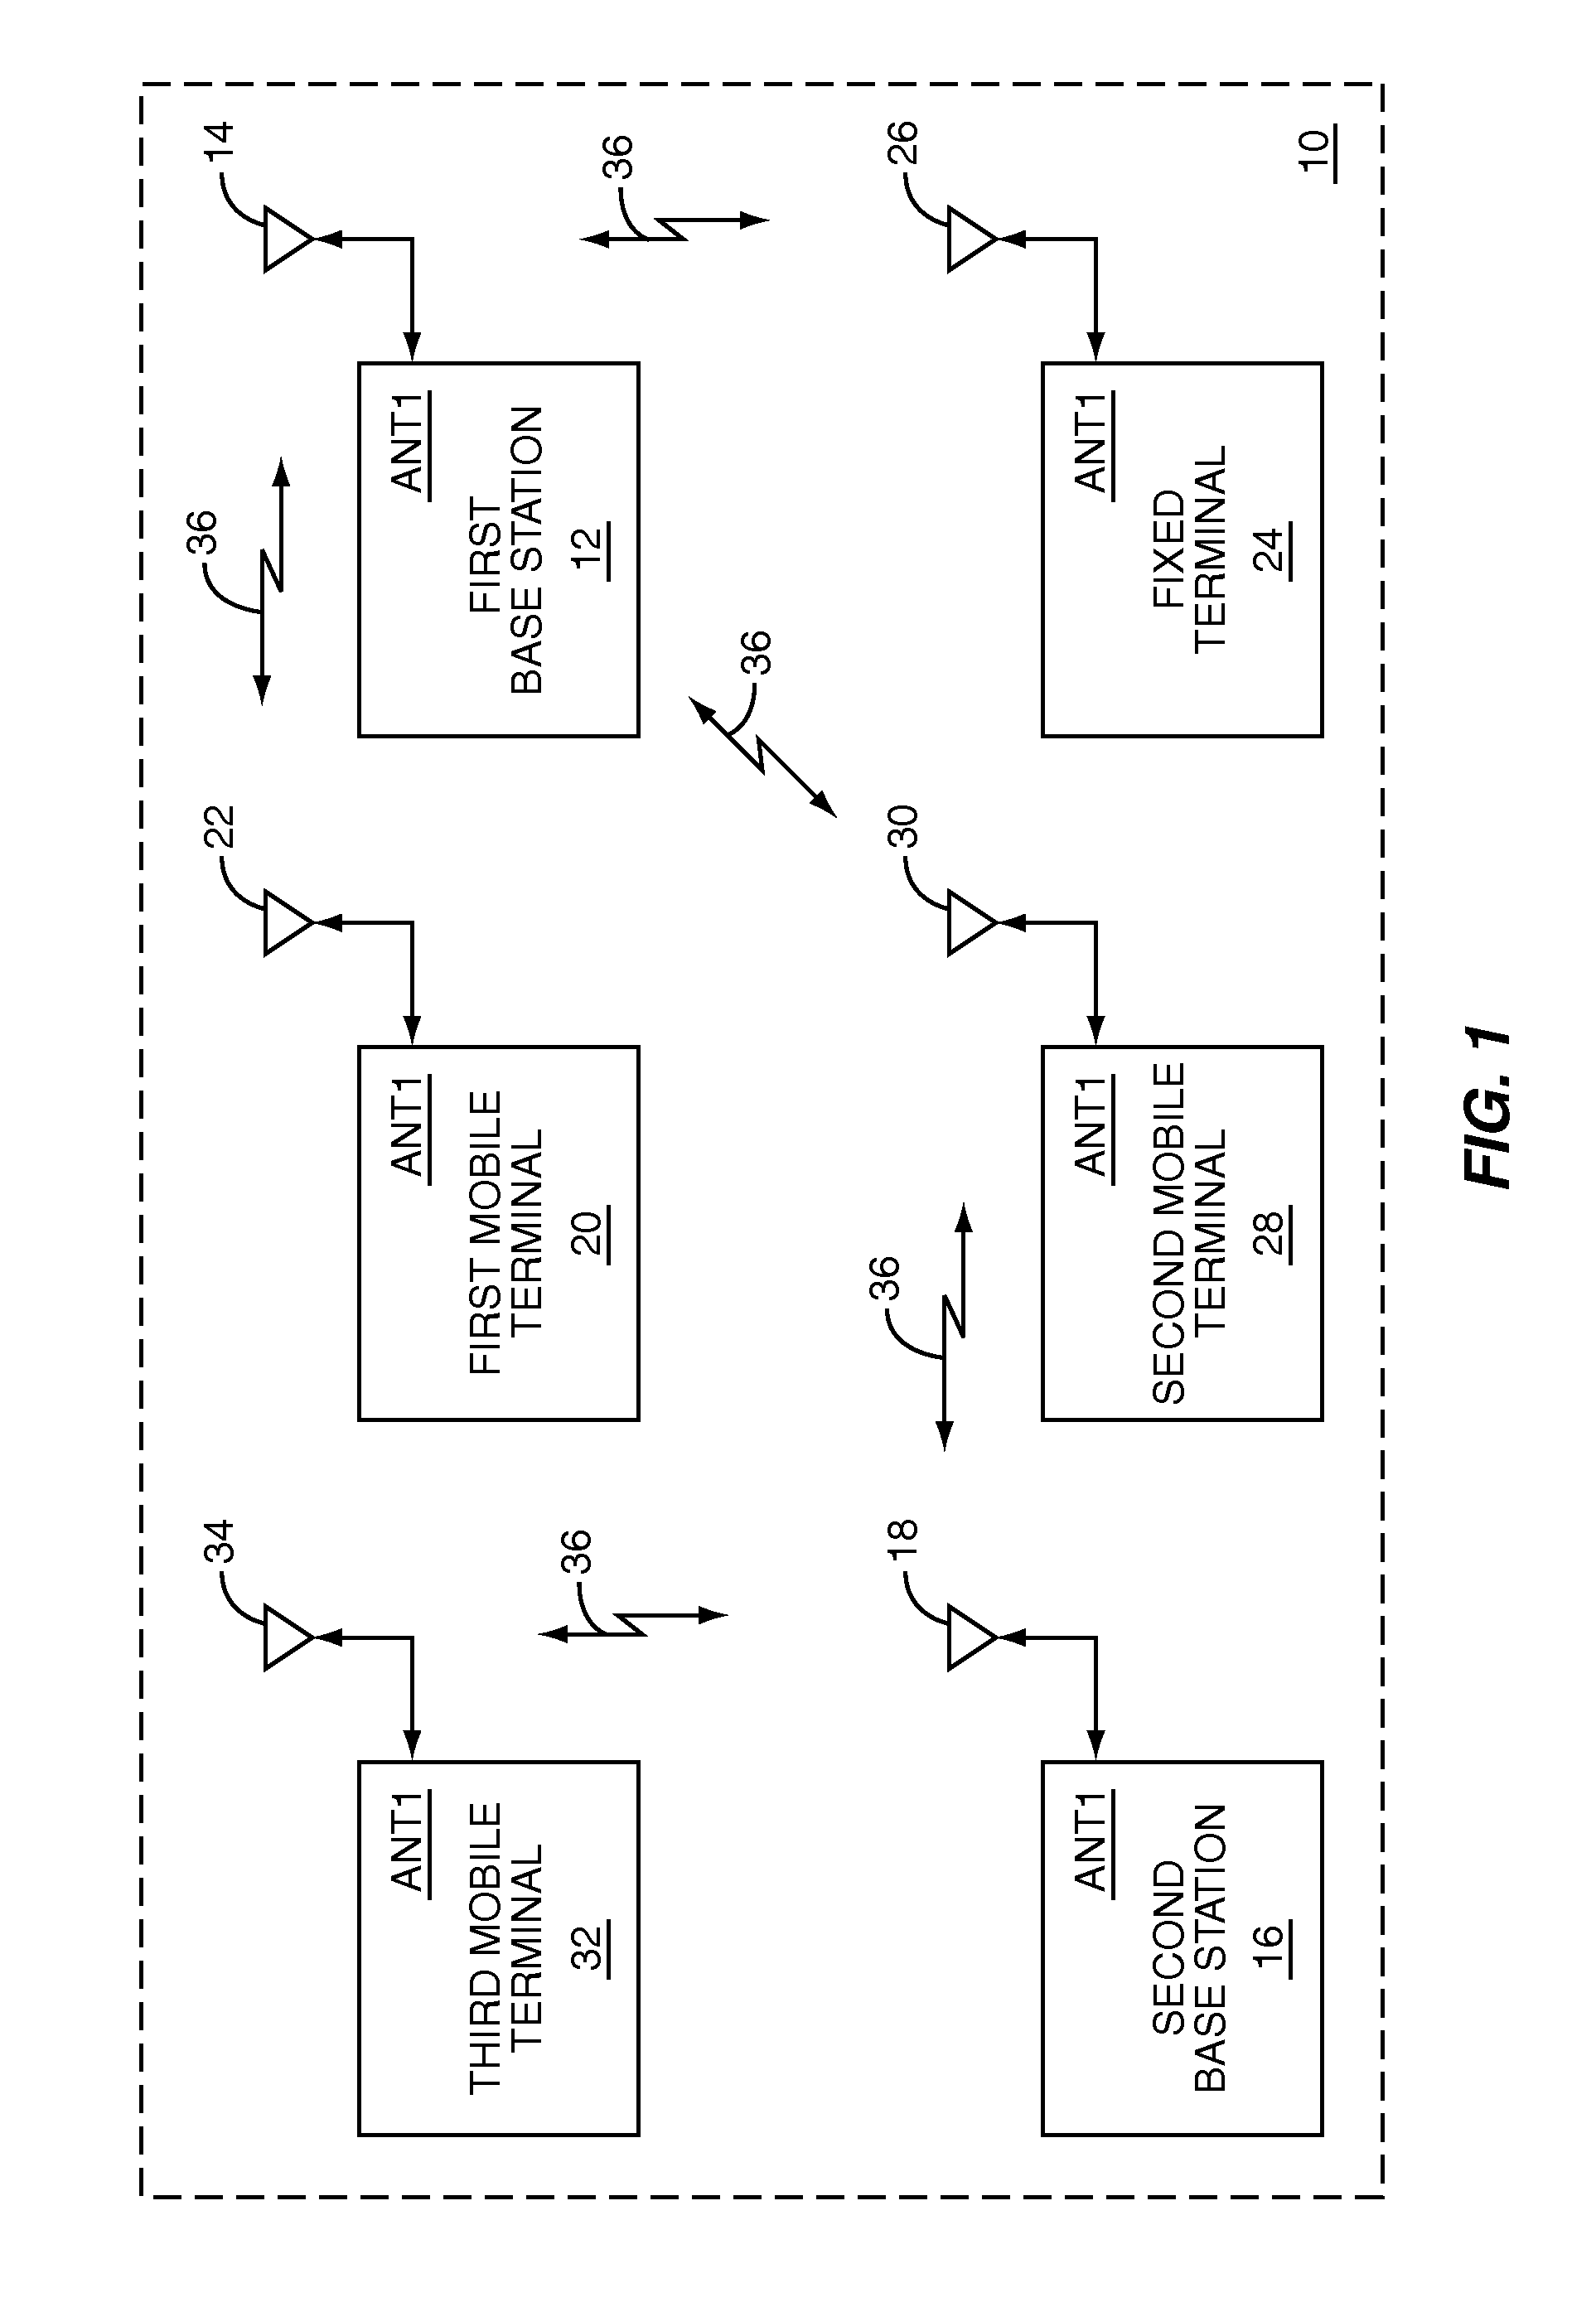 Processing differentiated hierarchical modulation used in radio frequency communications